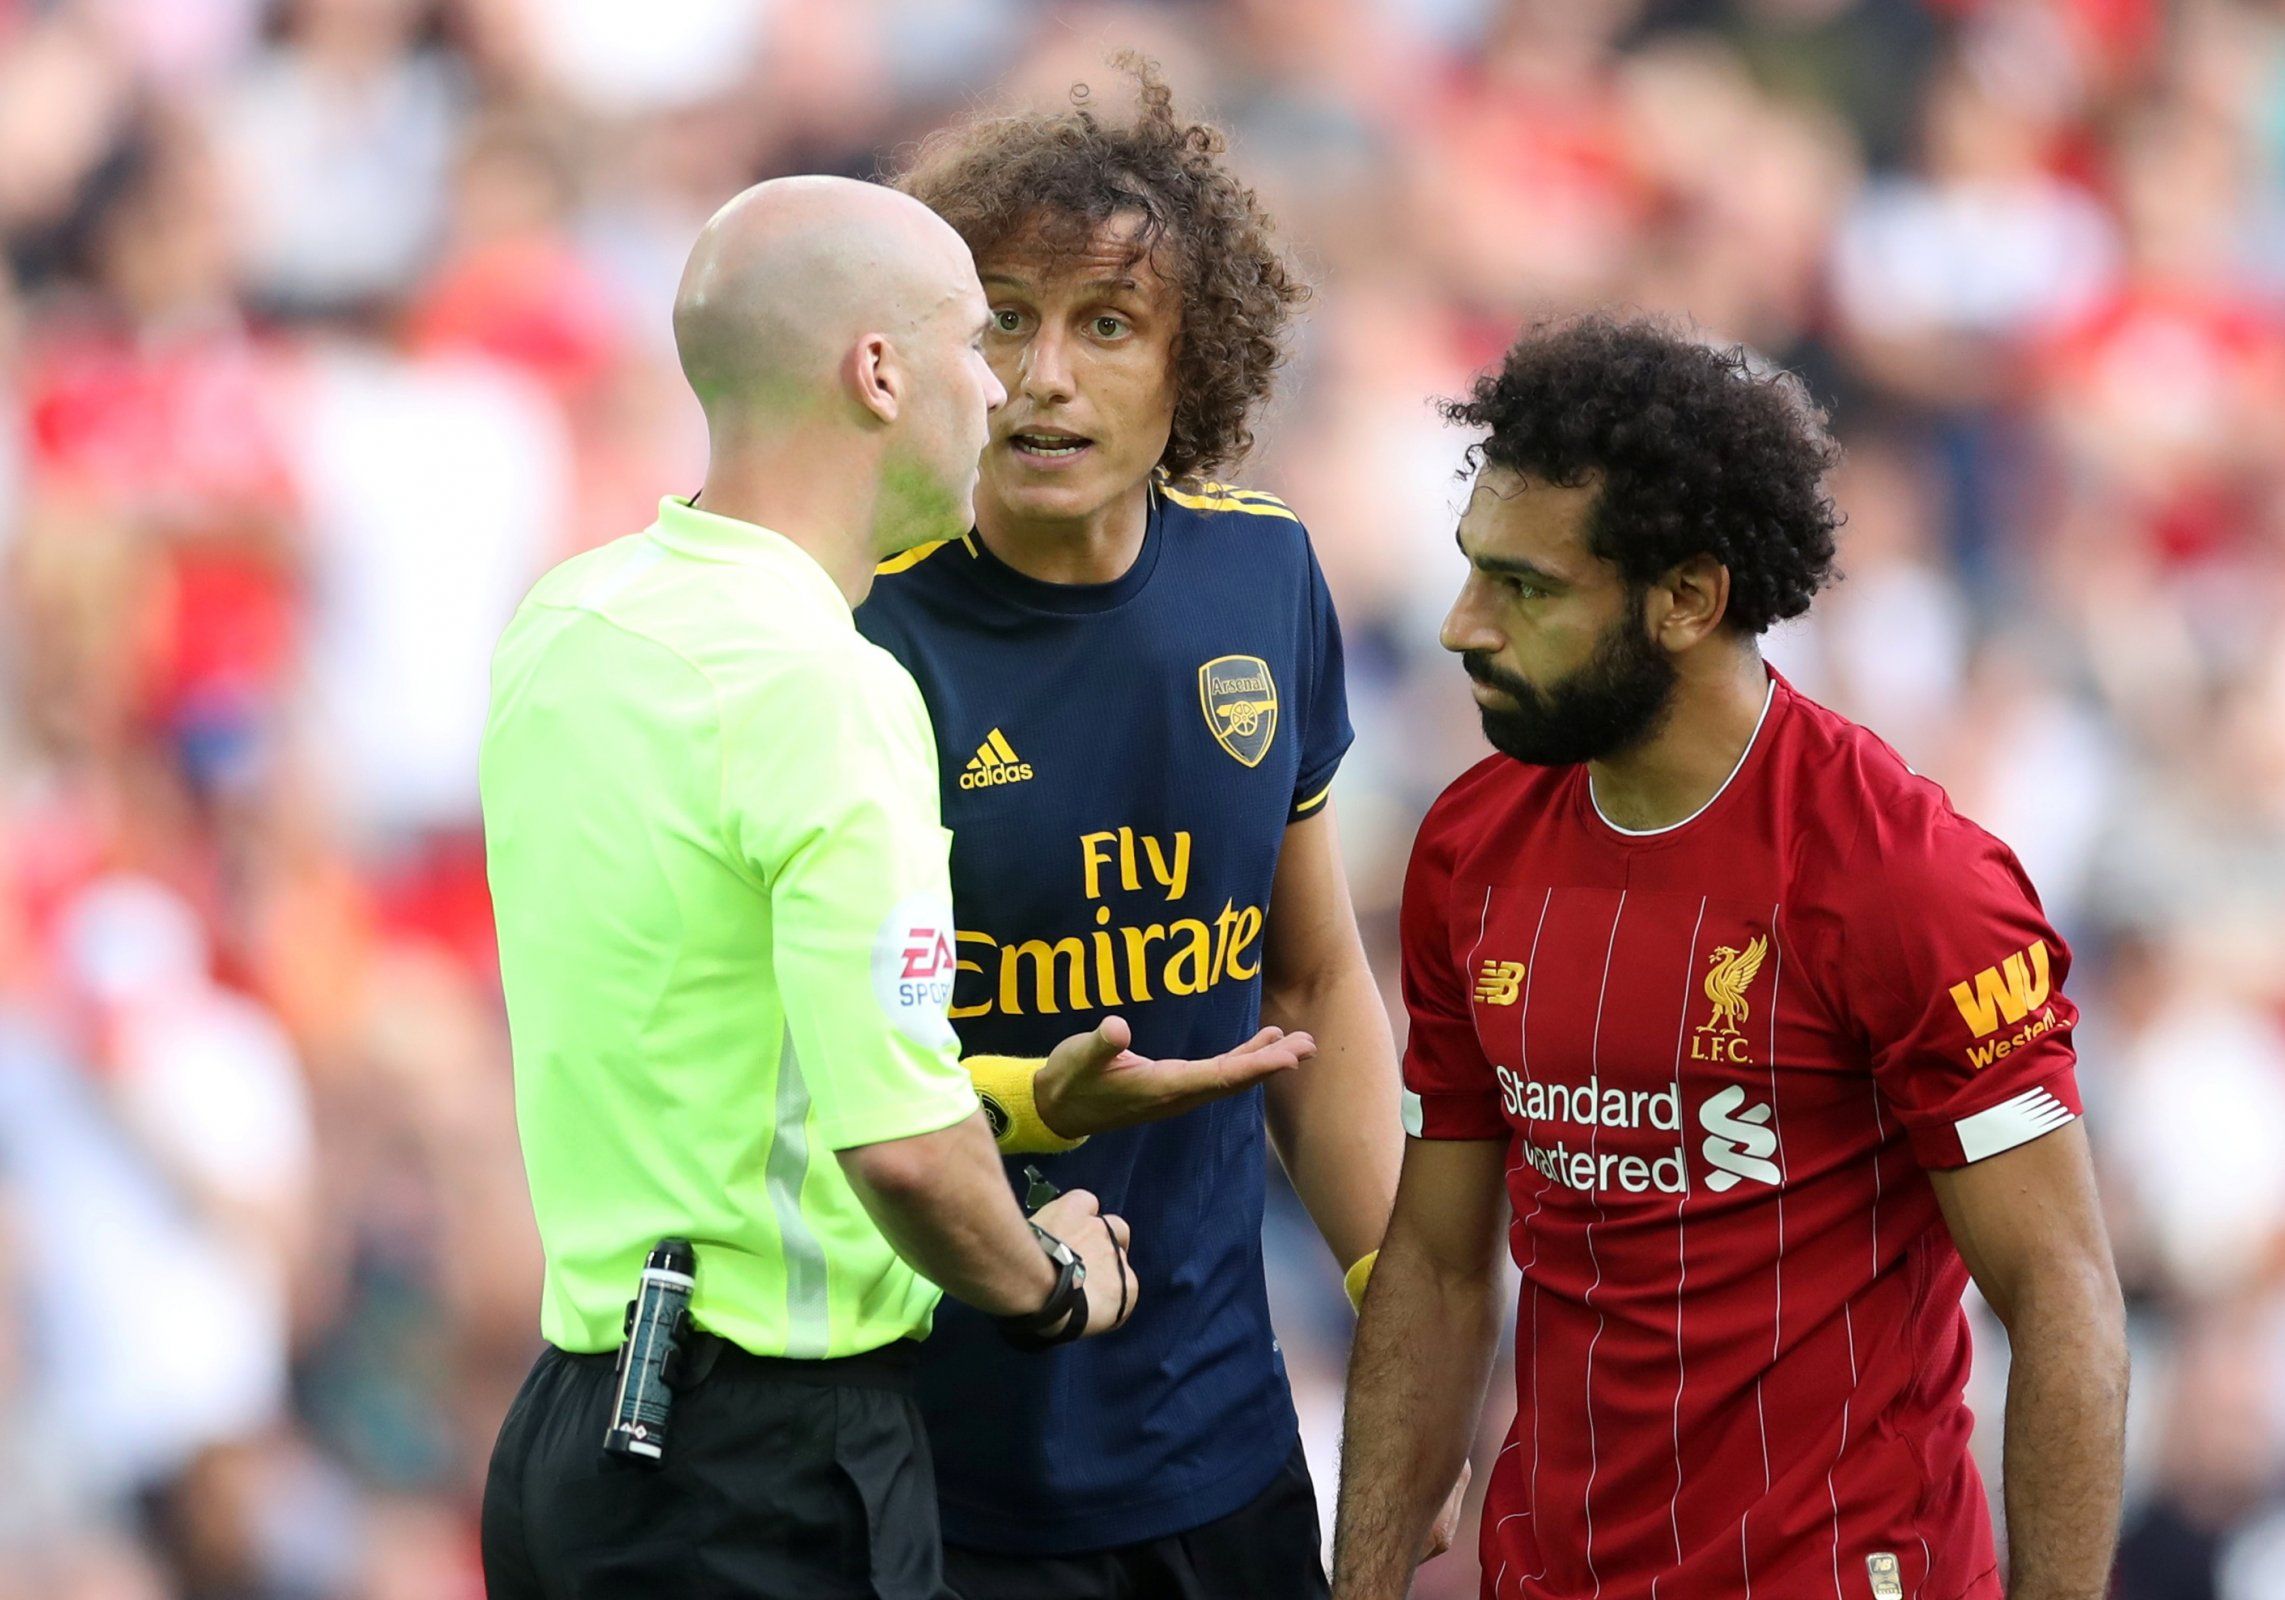 David Luiz gets a word from the referee